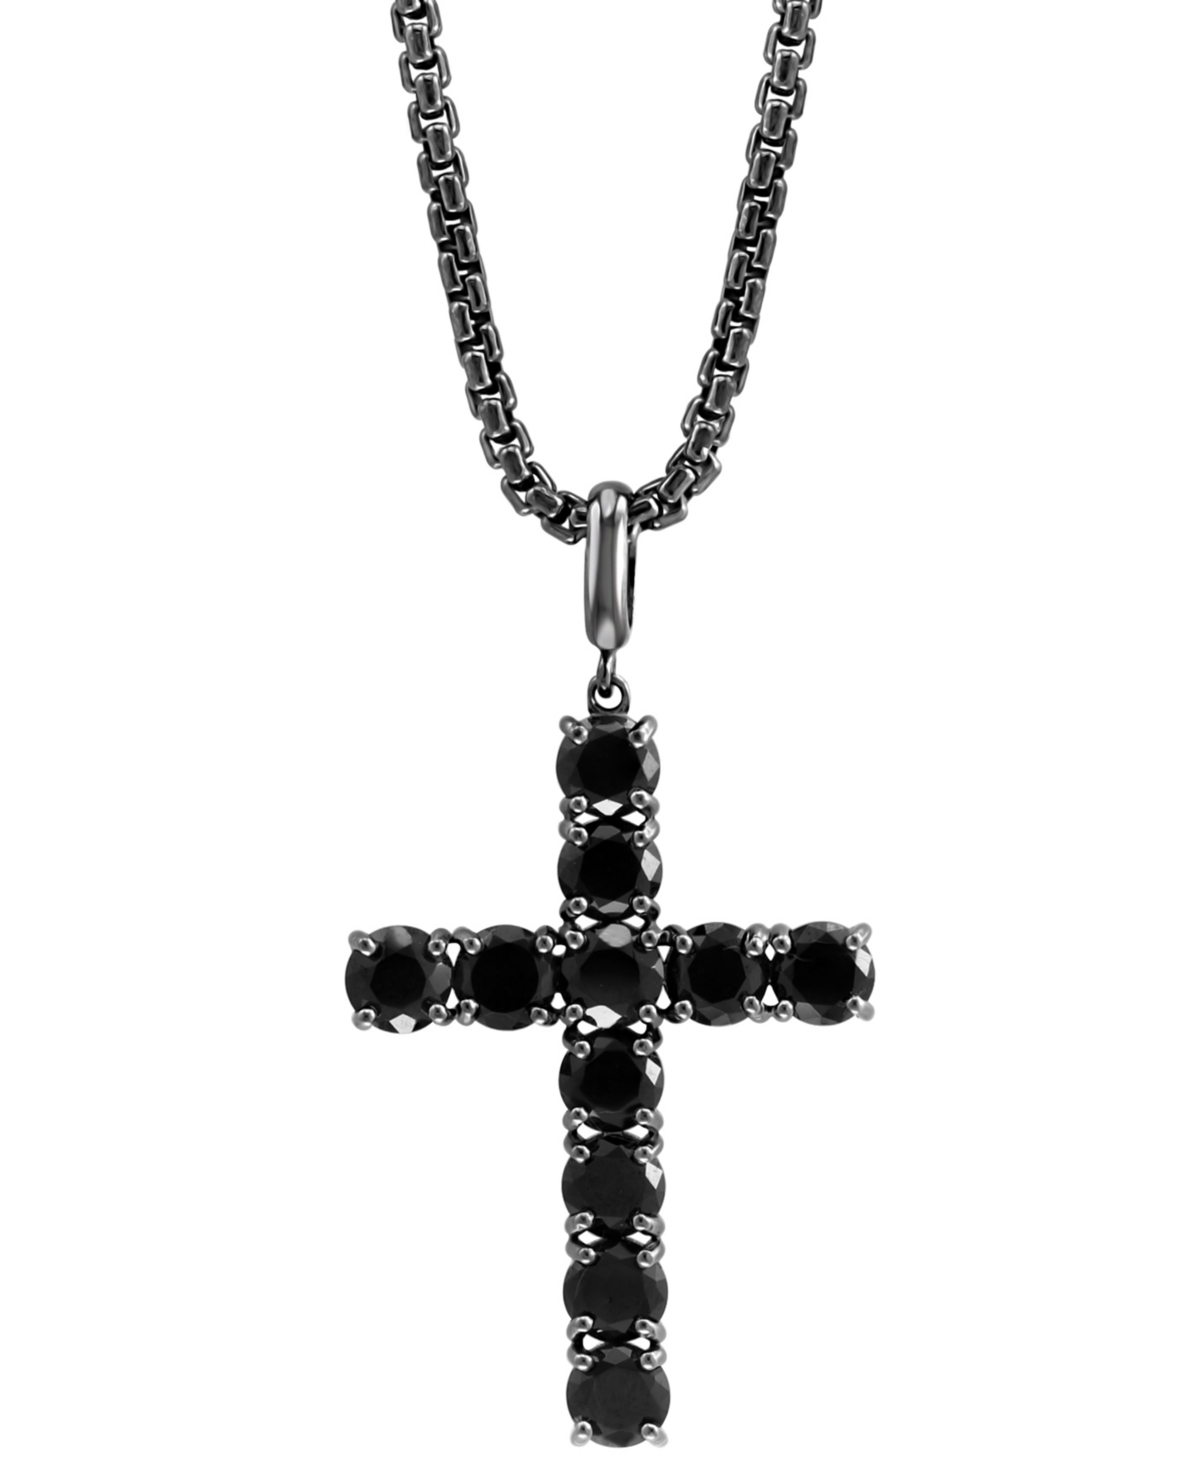 Effy Men's Black Spinel 22" Pendant Necklace in Black Rhodium-Plated Sterling Silver - Sterling Silver